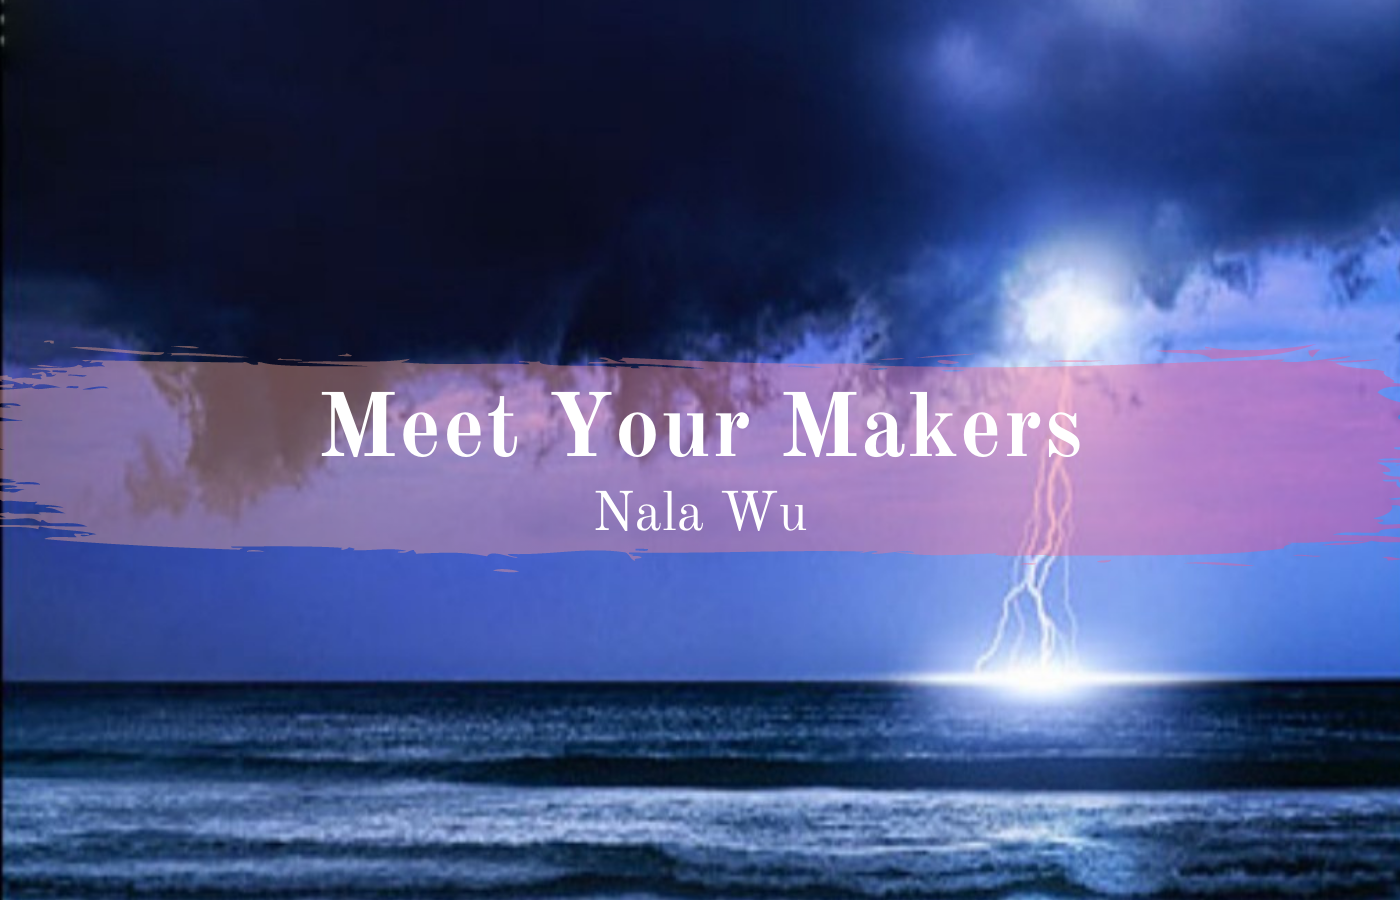 Text reads Meet Your Makers over a stormy ocean